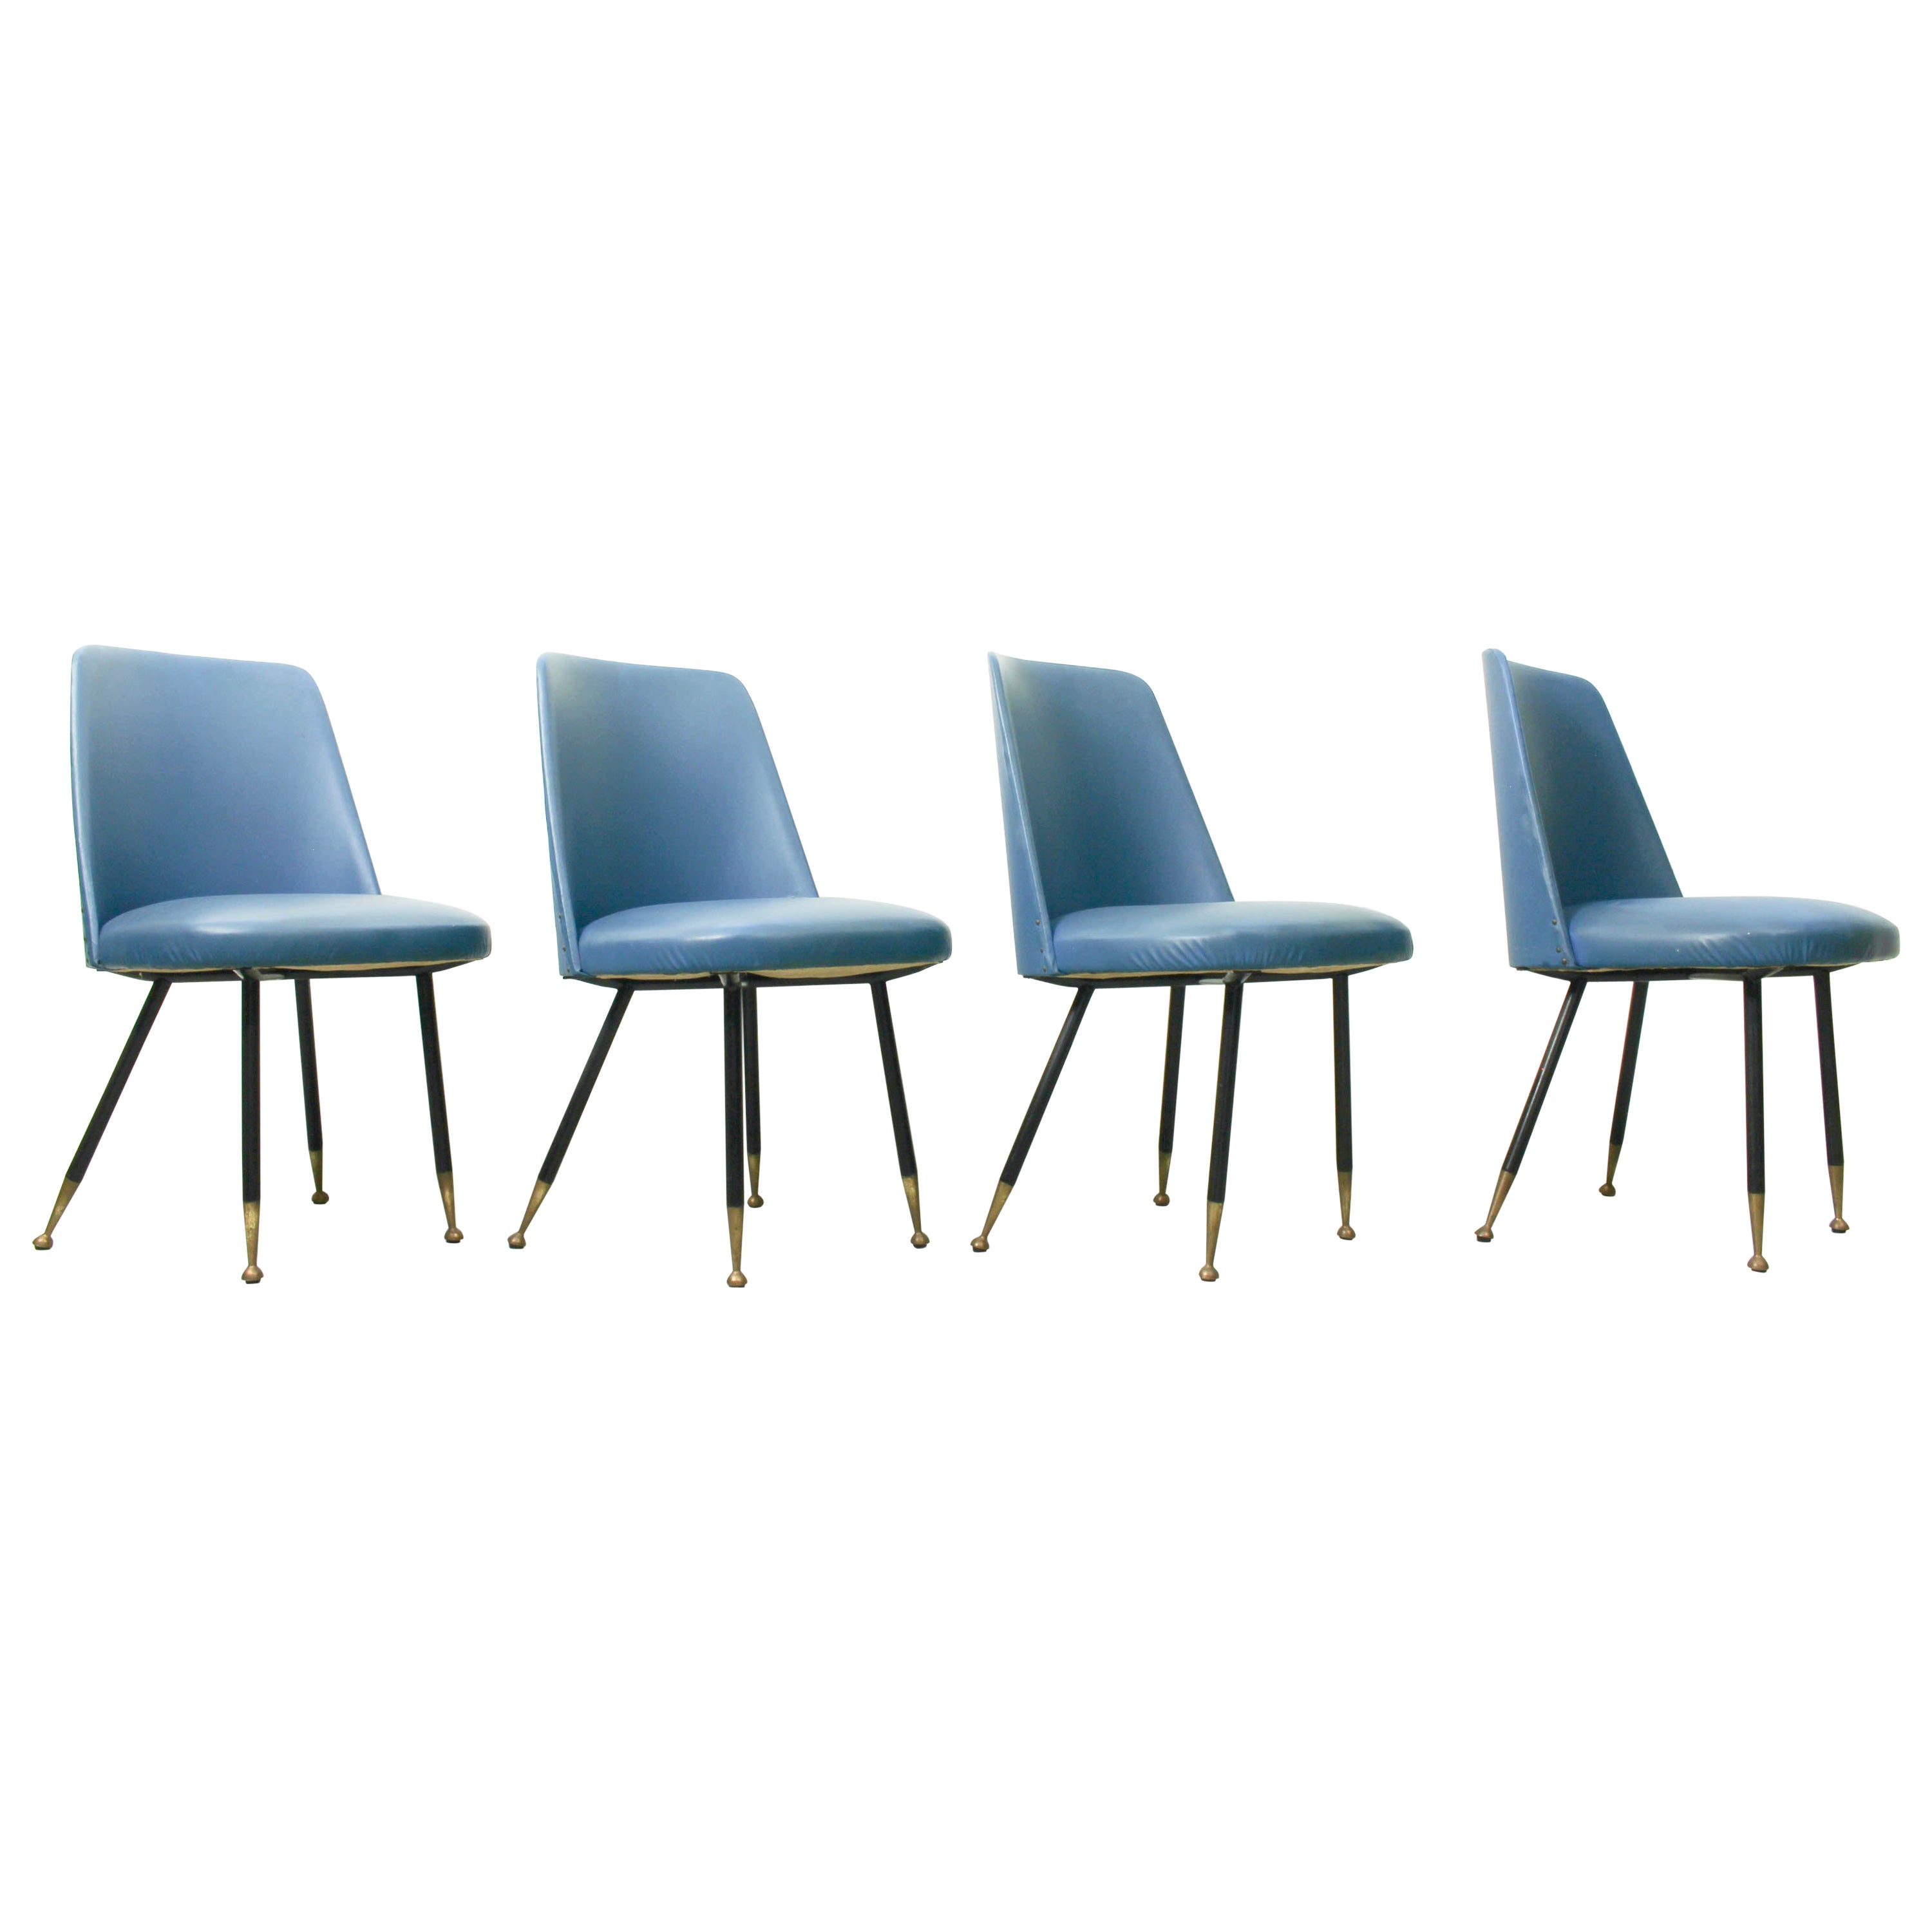 Set of 4 Elegant Italian Dining Chairs with Brass Feet, 1950s